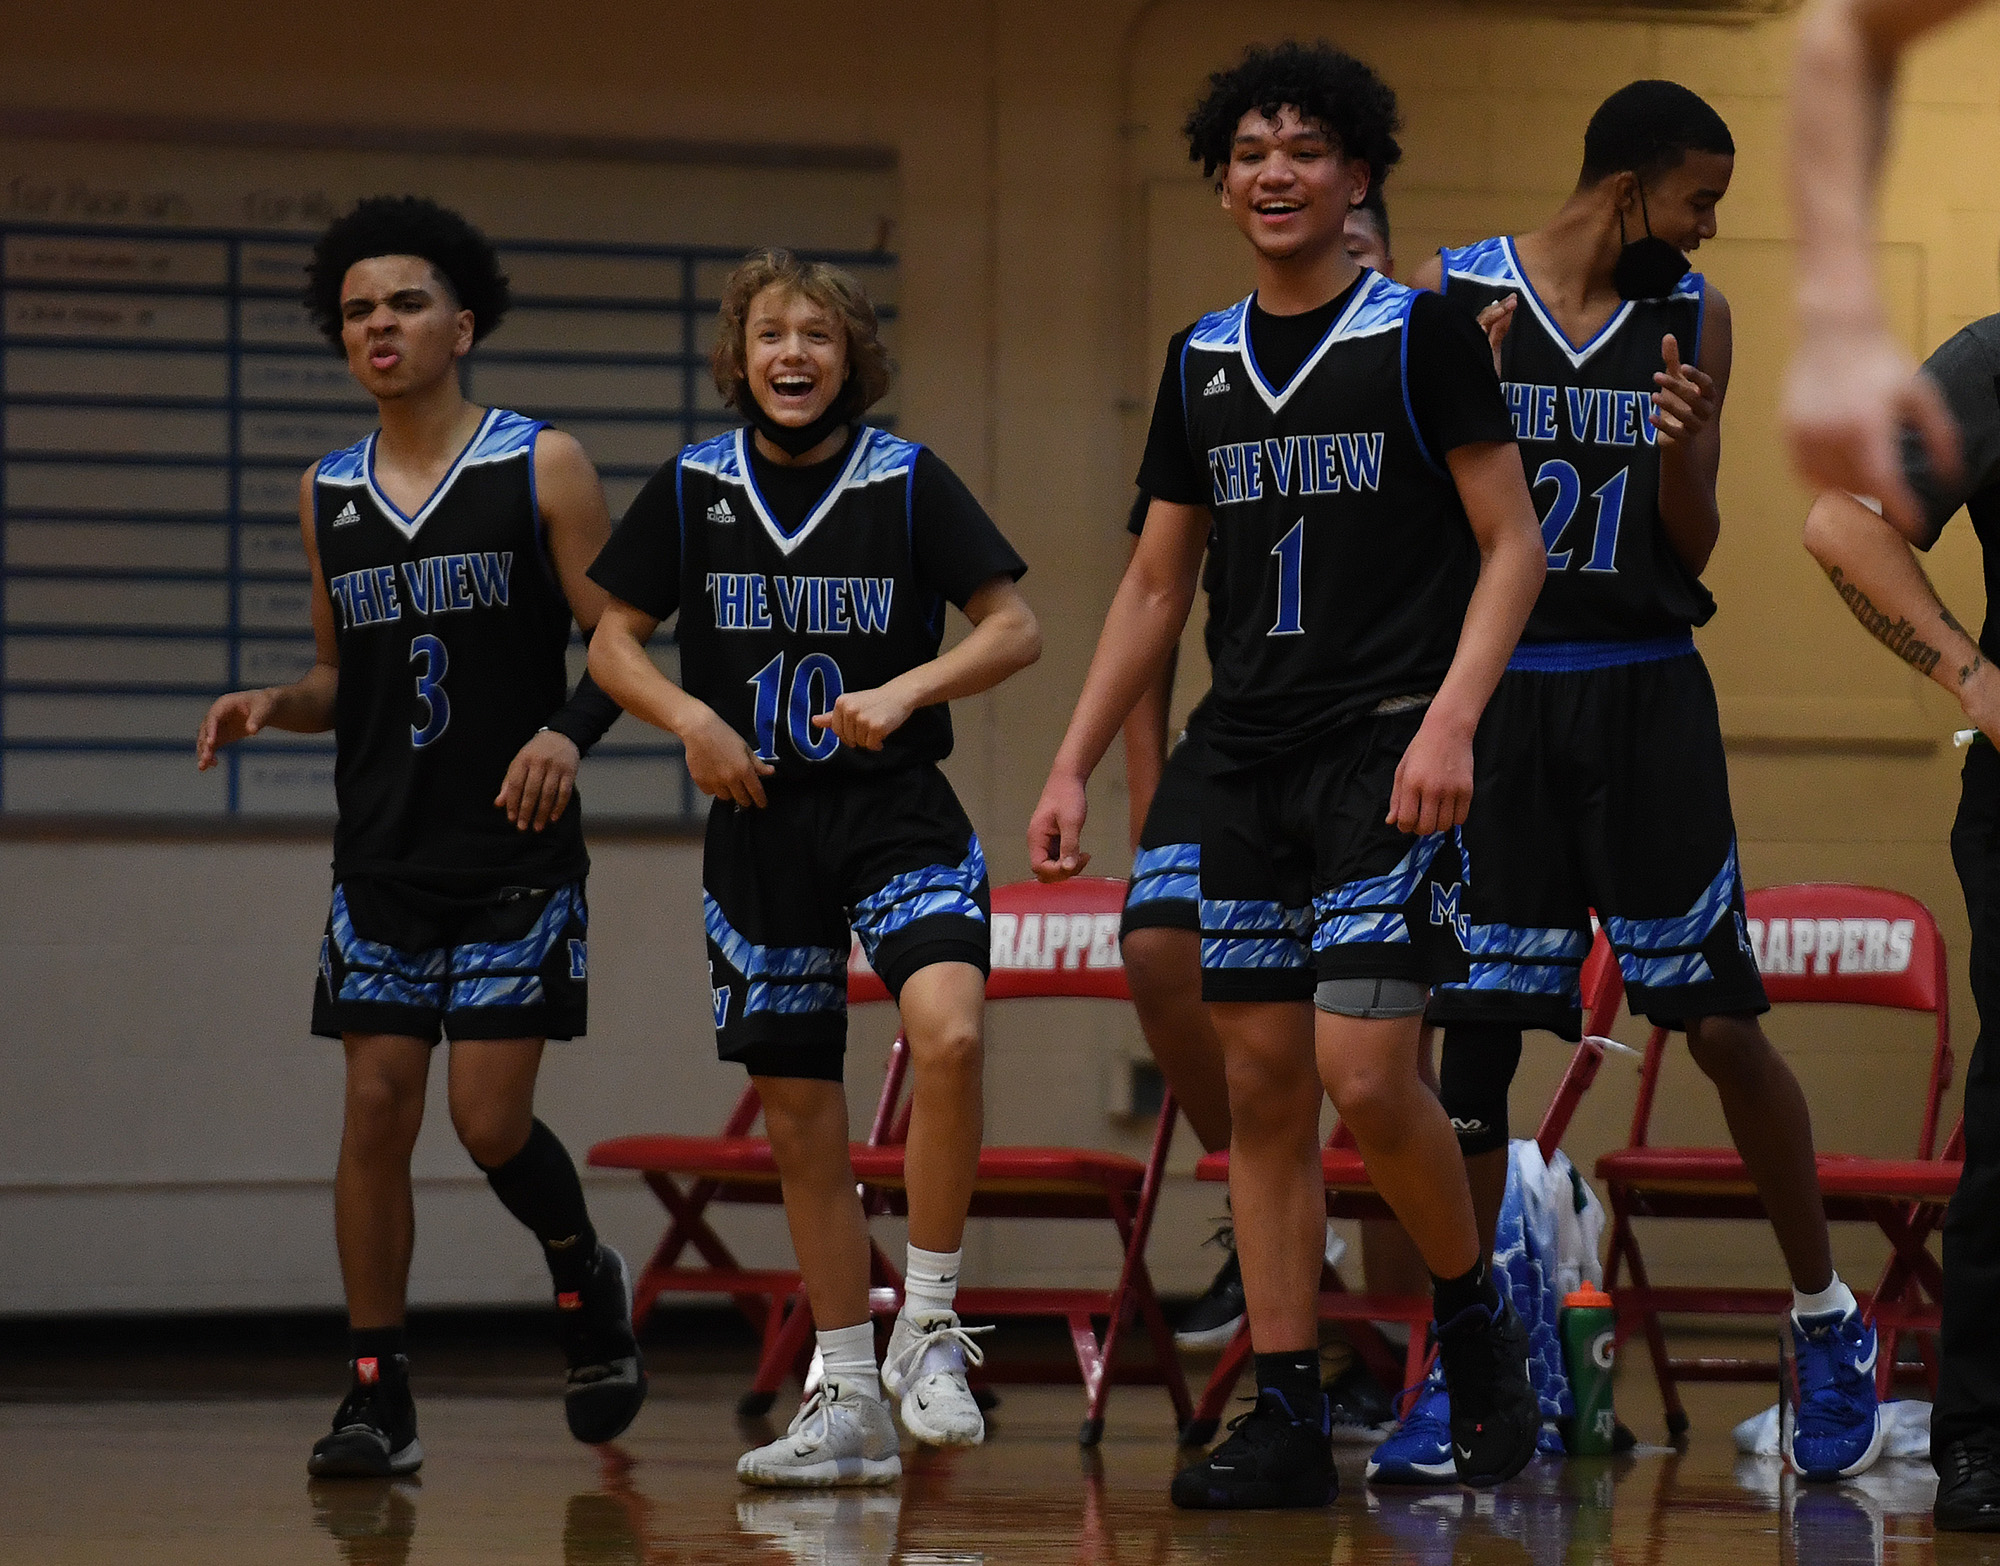 Mountain View players celebrate a halftime buzzer beater on Tuesday, Nov. 30, 2021, during the ThunderÕs 73-46 win against the Trappers at Fort Vancouver High School.